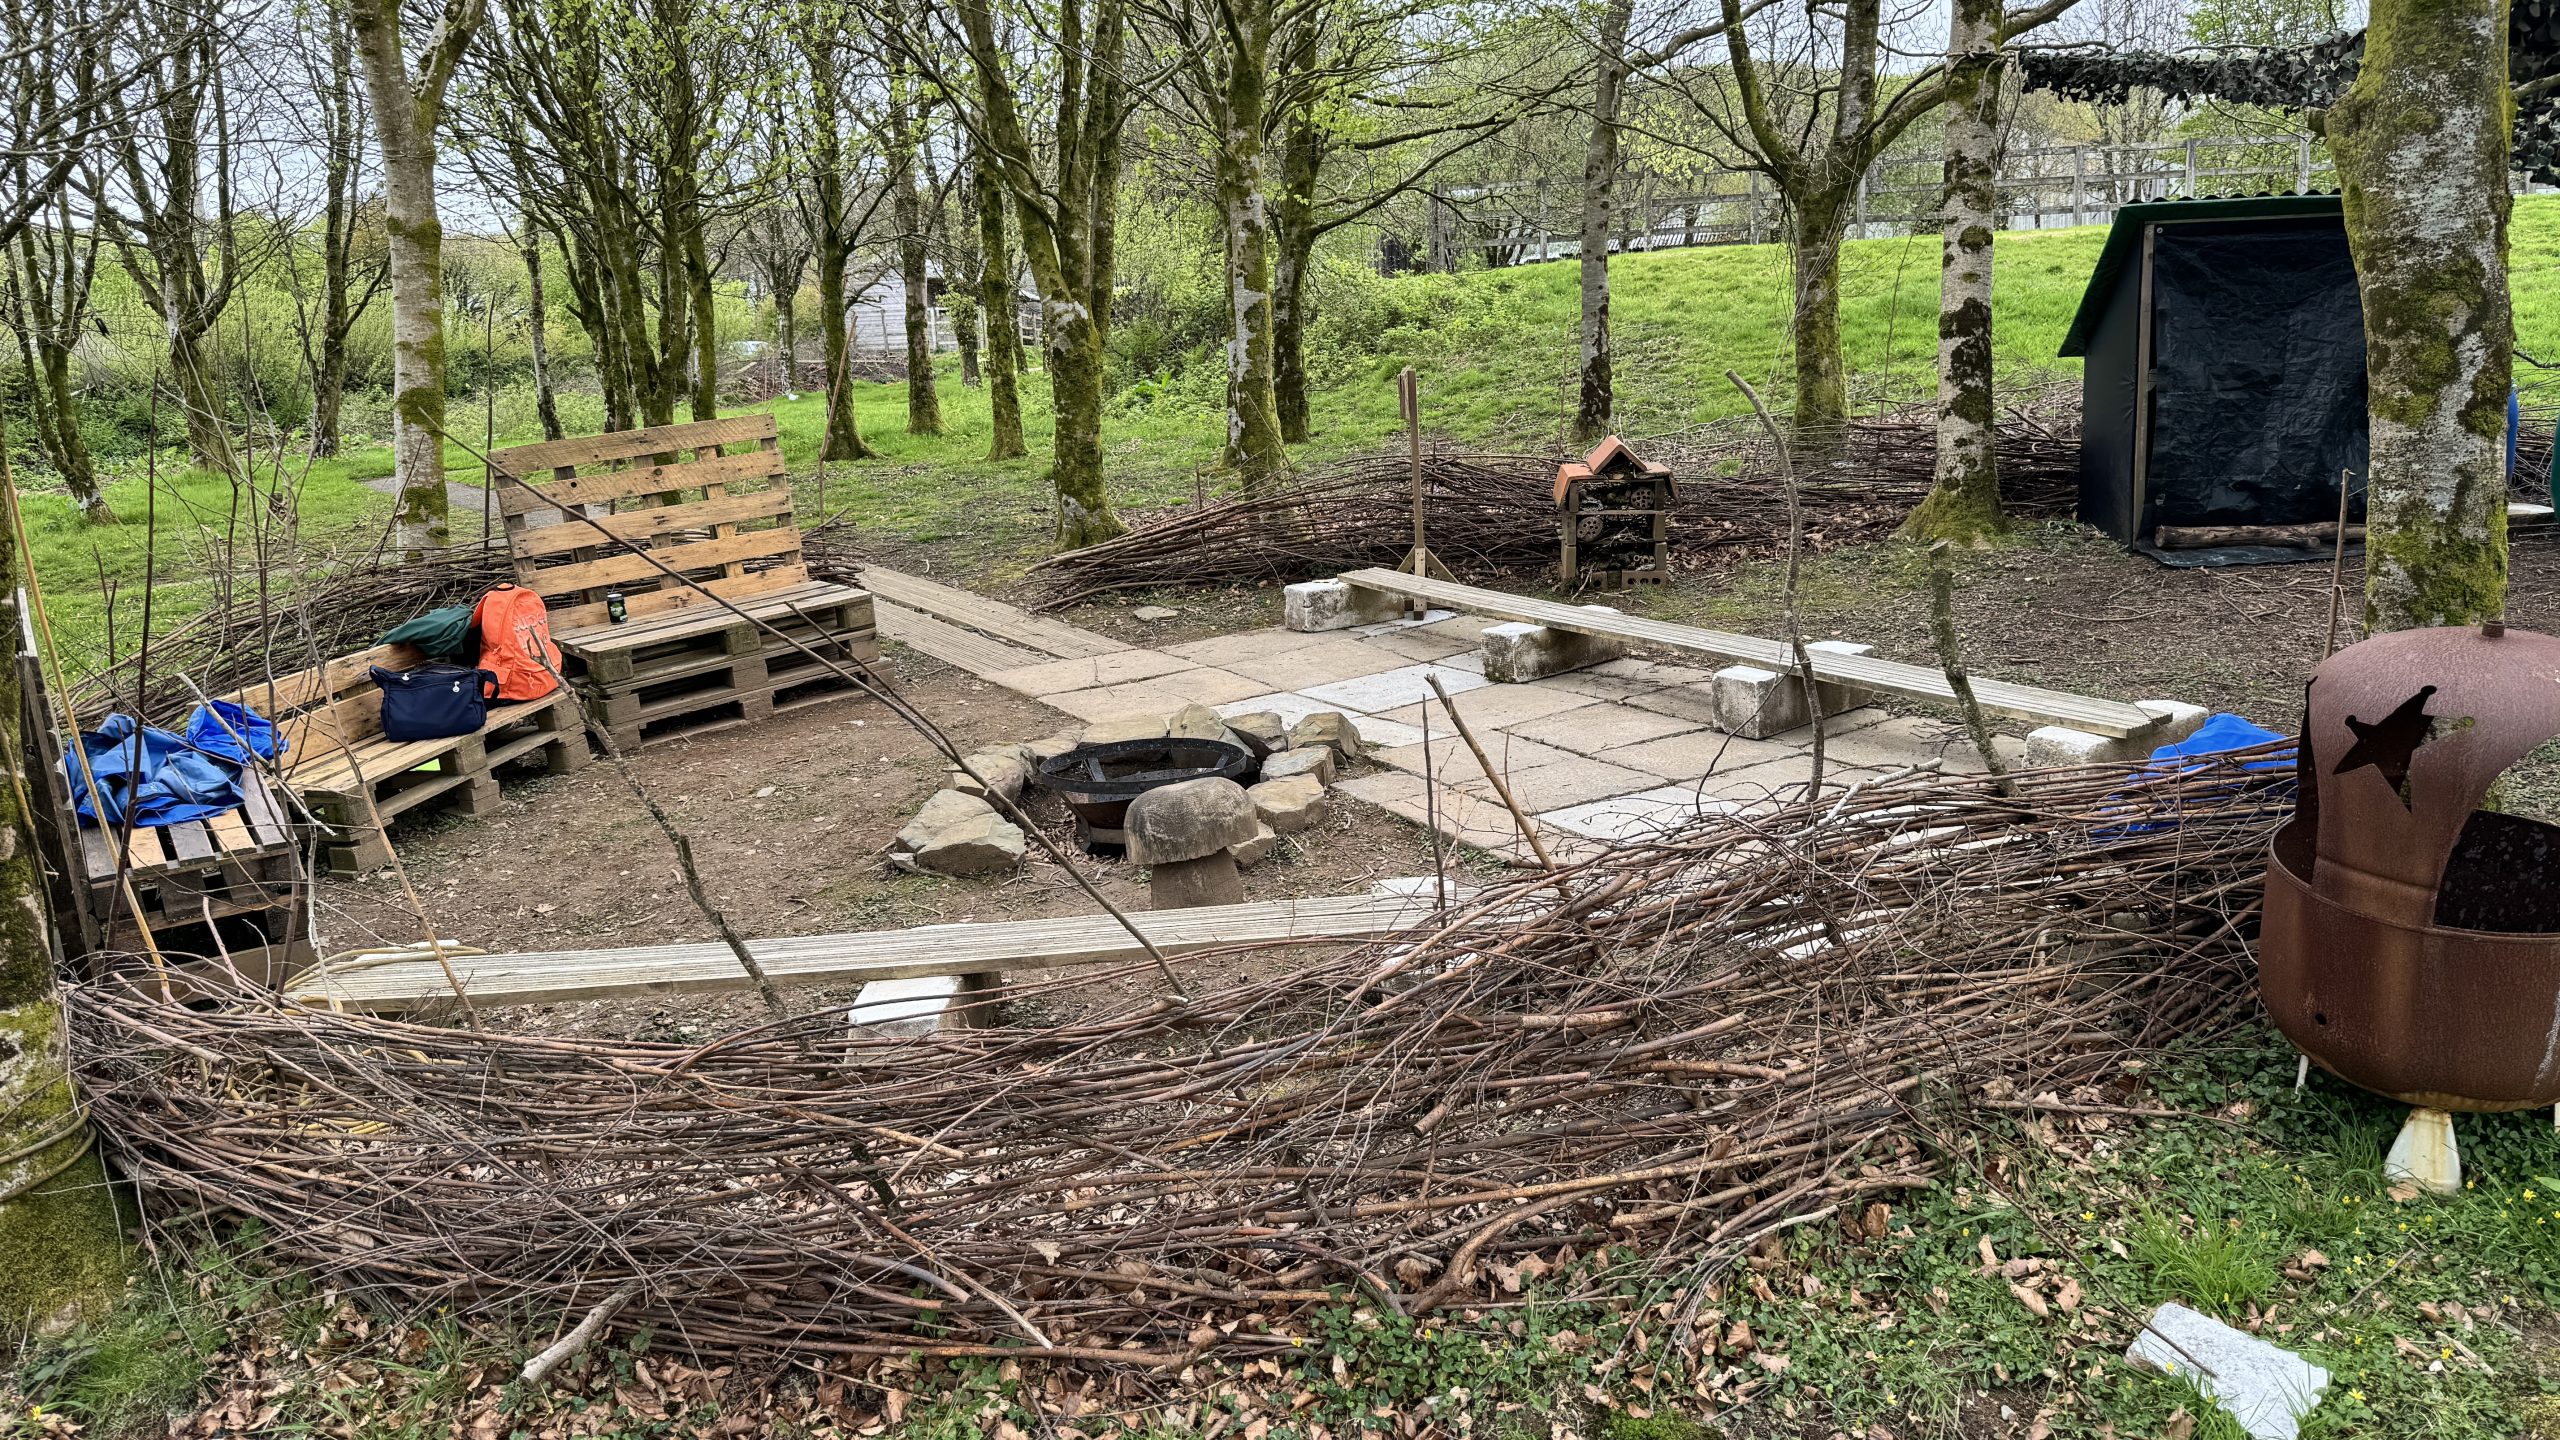 An area within woodlands with woven branches creating a perimeter fencing around. The area has a firebowl in the ground, some benches in a circle shape around the firebowl and off to the right, a shed.